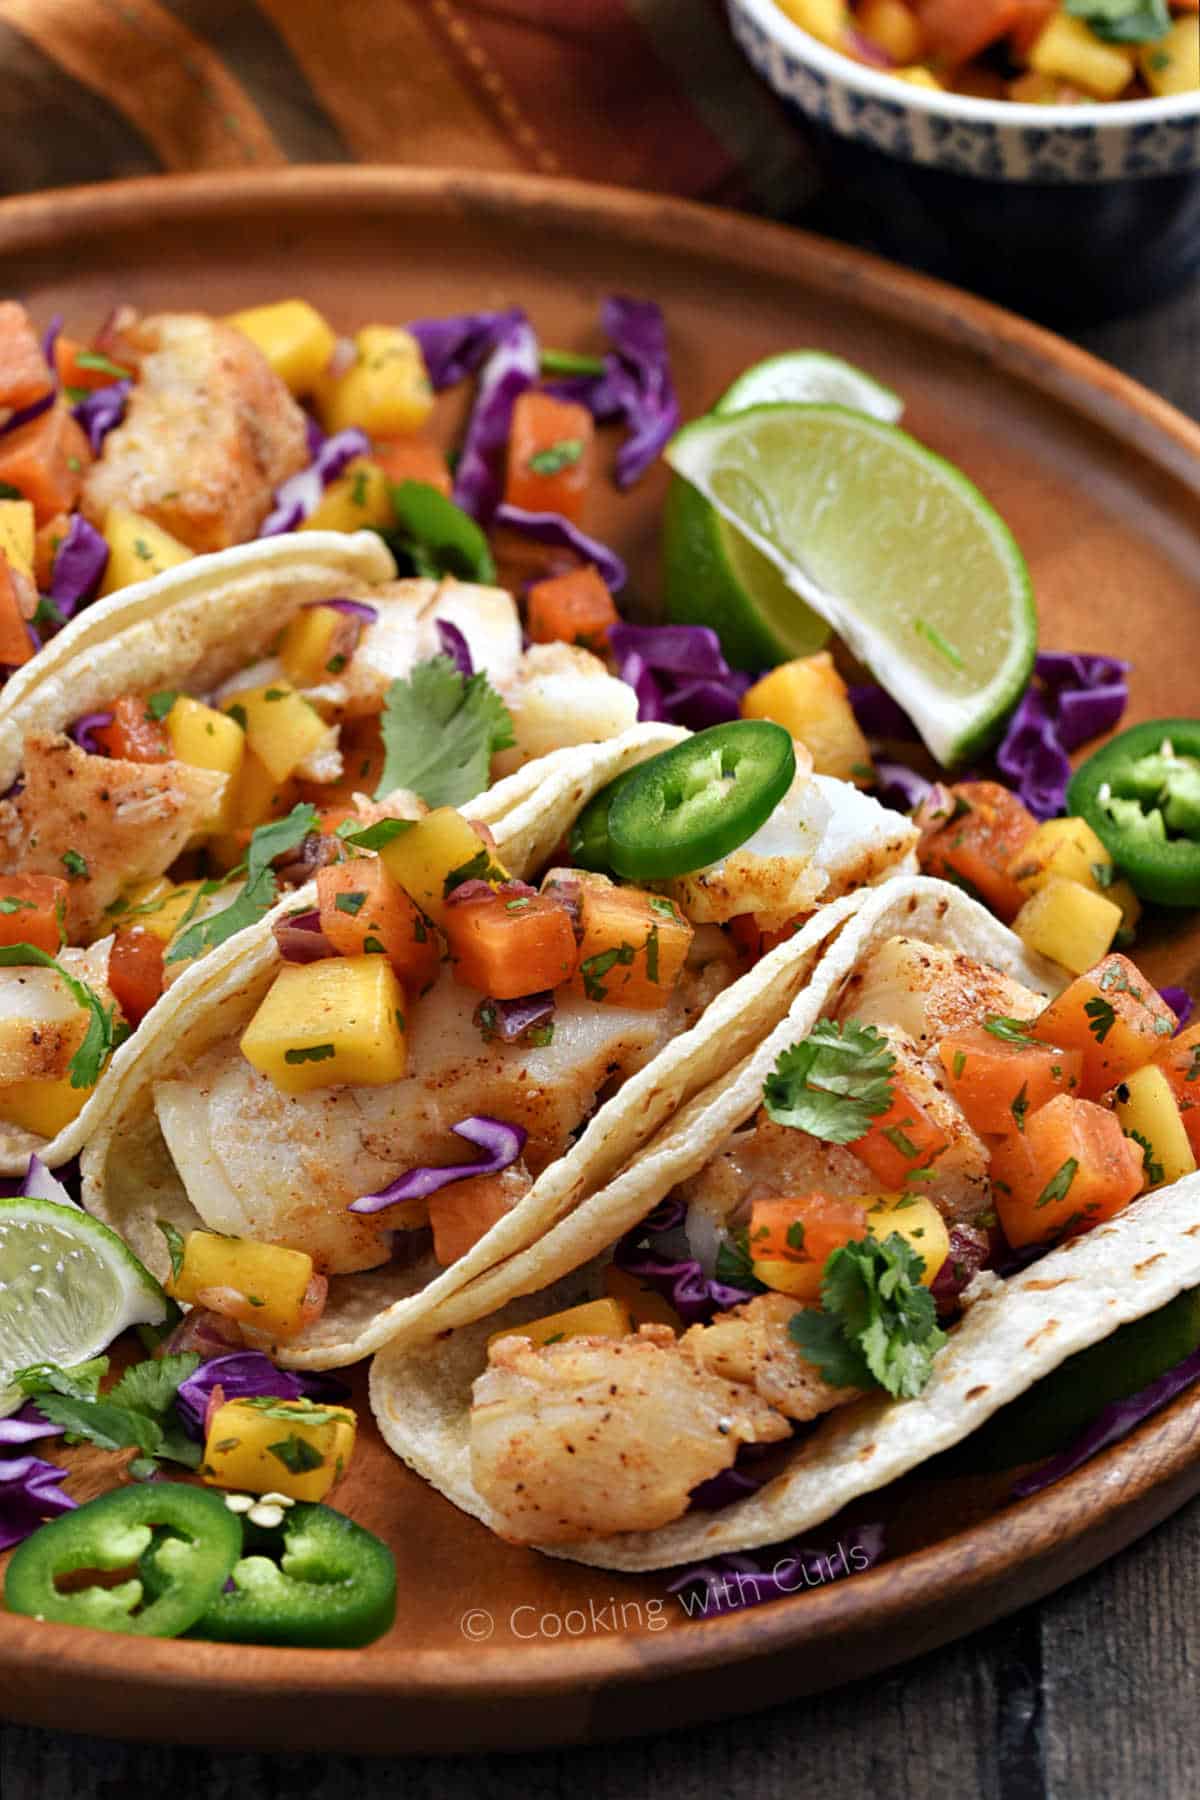 Three fish tacos with mango salsa and shredded red cabbage on a wood platter.